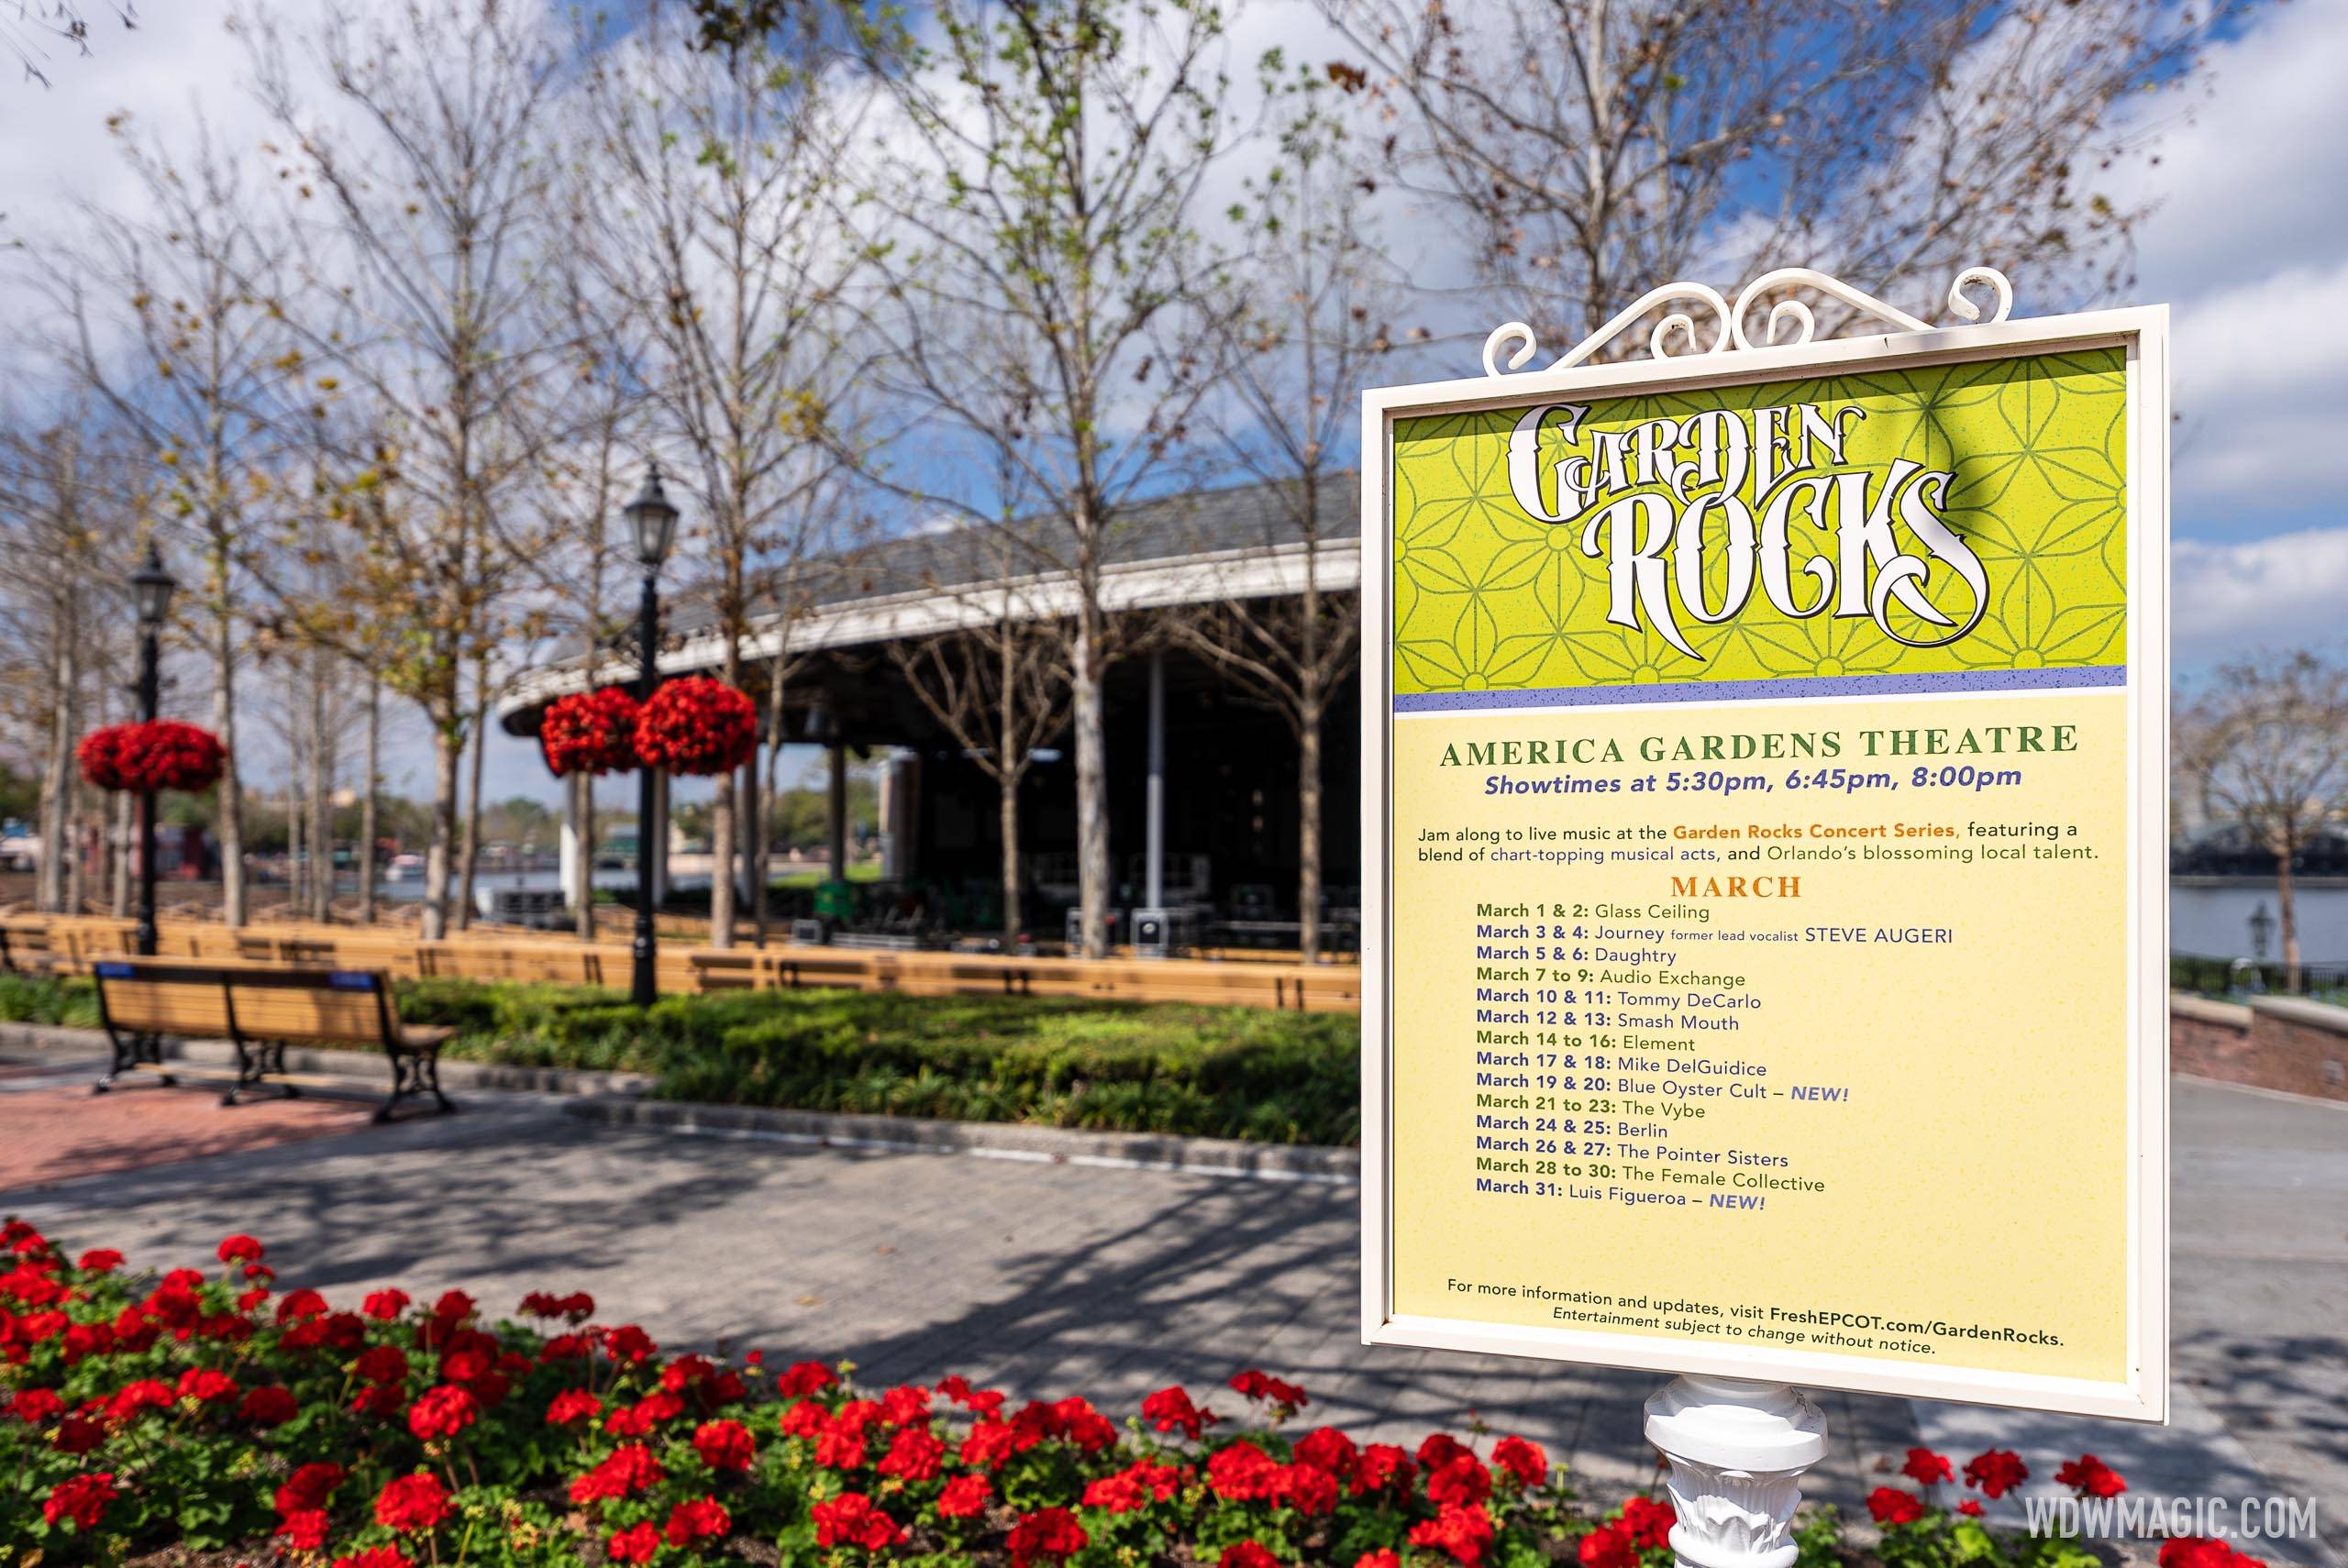 Local Orlando talent added to the line-up for the 2023 EPCOT Garden Rocks Concert Series